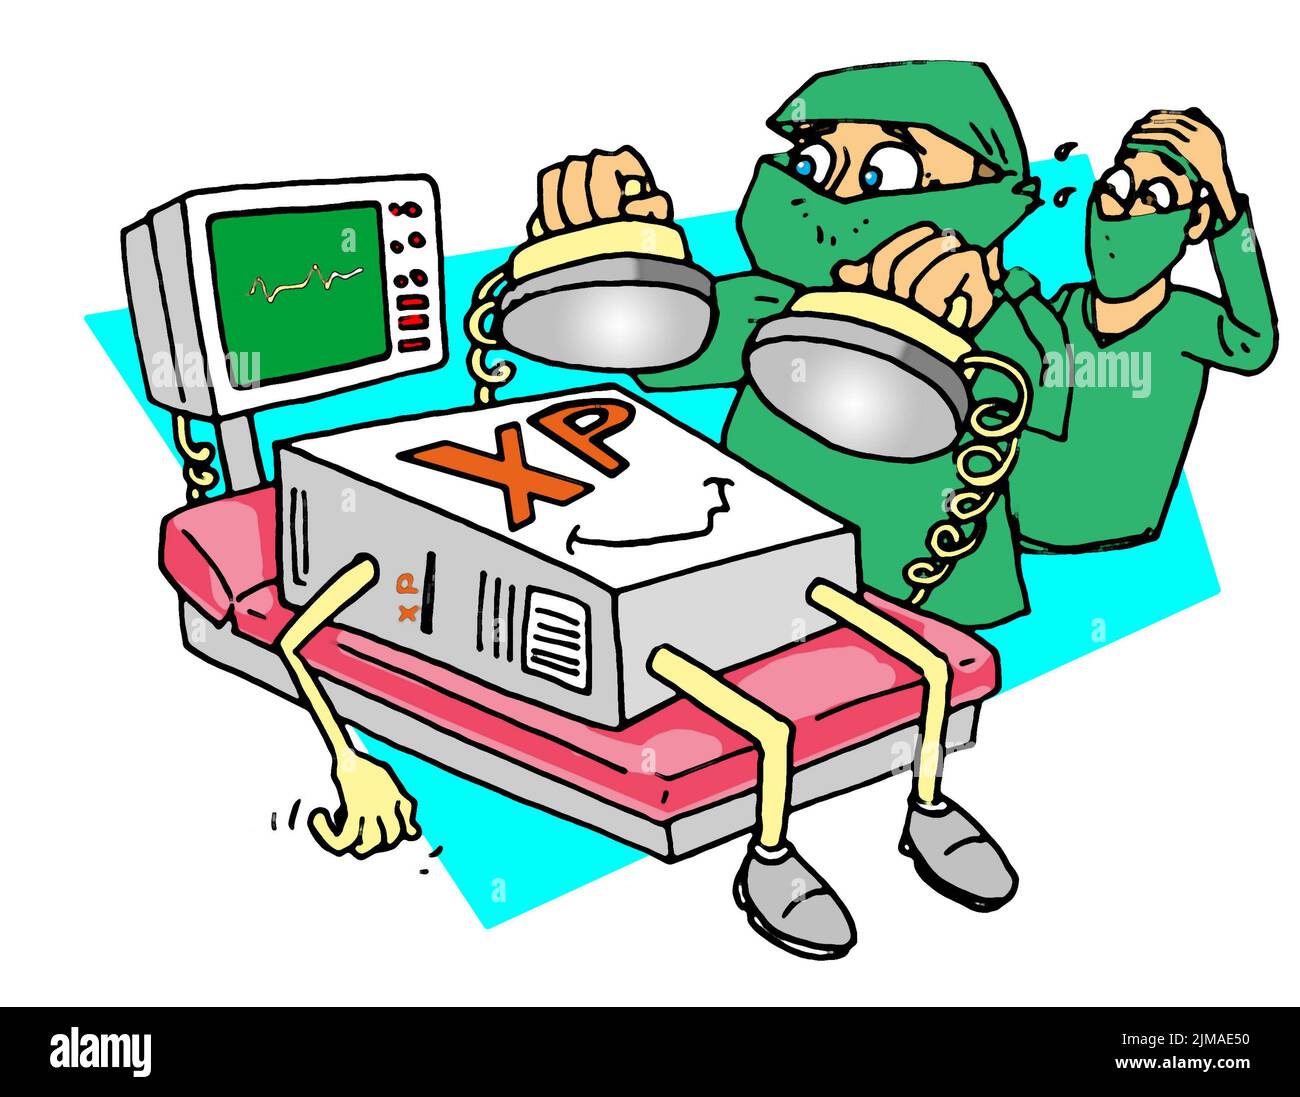 Art, XP-ired software being resuscitated by medics, illustrating the concept of computer users using or /prolonging the life of old & vintage software Stock Photo